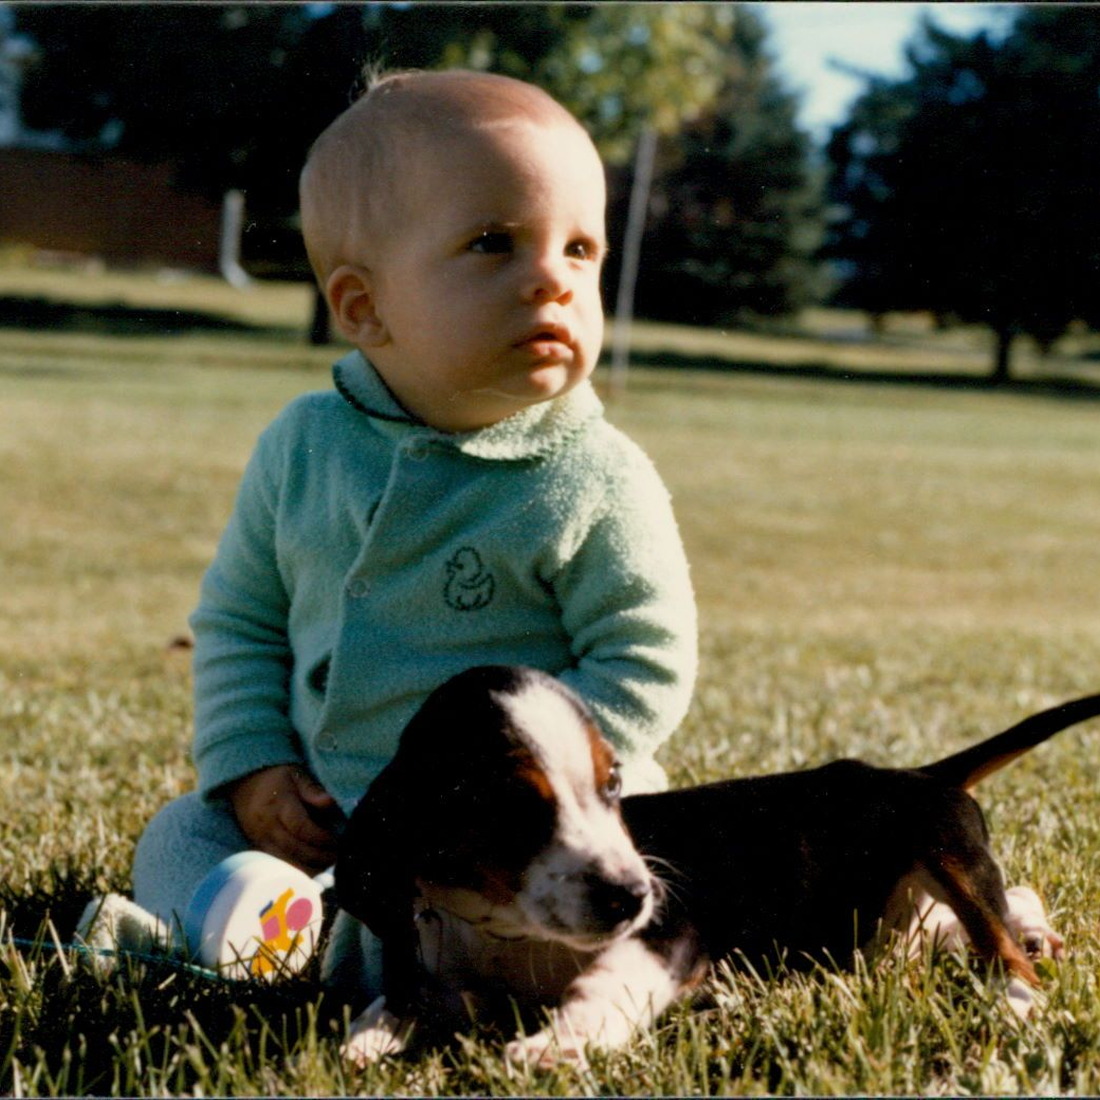 A baby and a puppy sitting outside in the lawn, with a vintage style